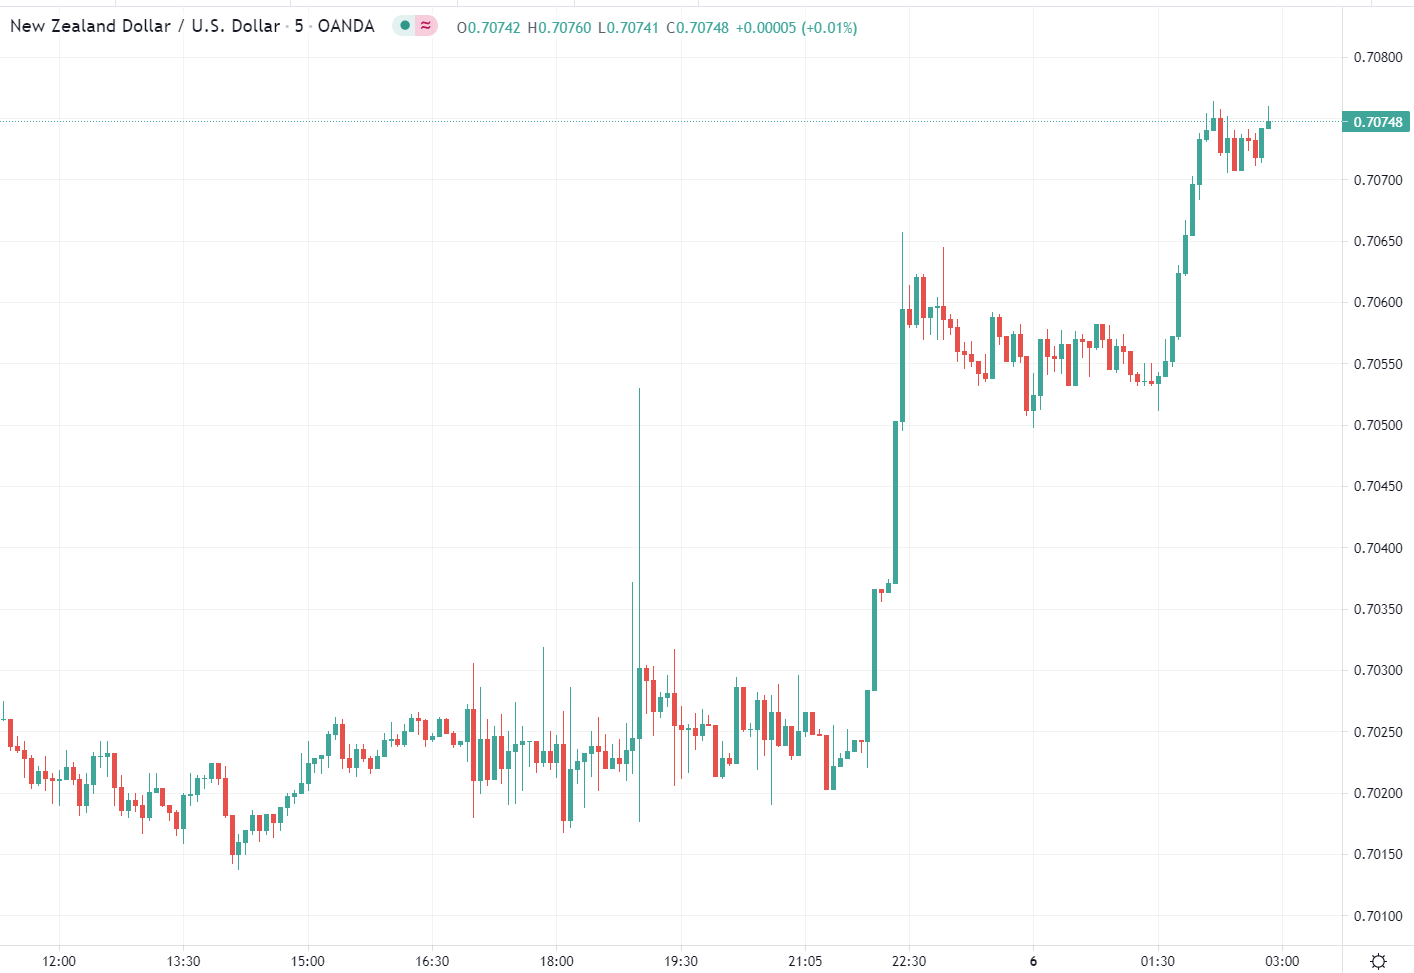 Forex news for Asia trading onTuesday6July 2021 New Zealand posts, strong business survey and subsequent RBNZ rate hike forecasts (and a little more):